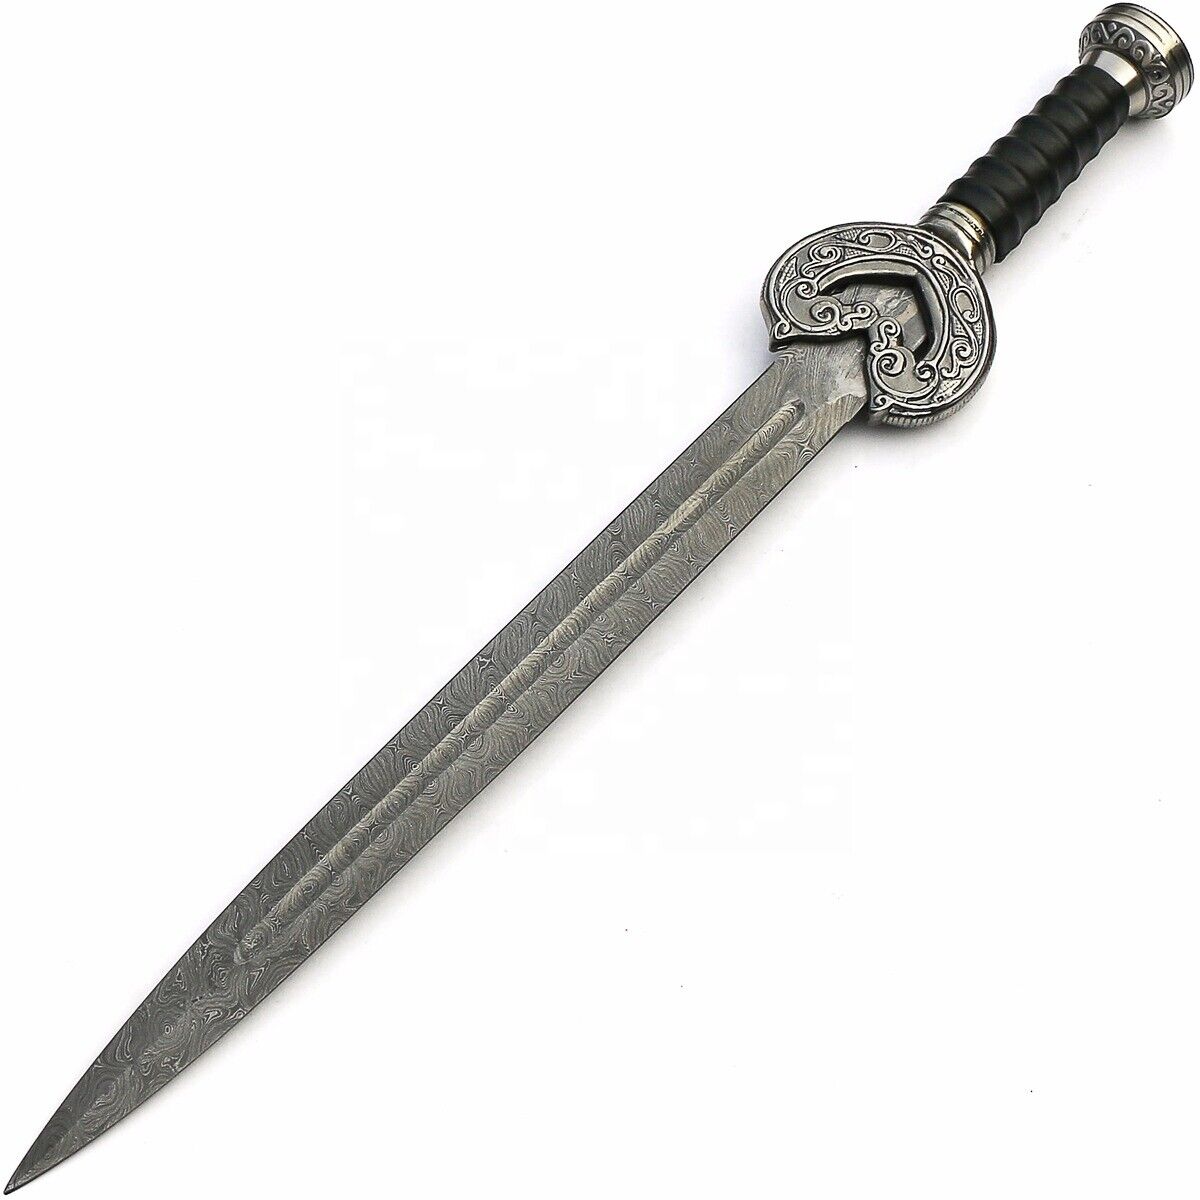 CUSTOM HANDMADE HAND FORGED DAMASCUS STEEL Lord of the Rings King Théoden Sword